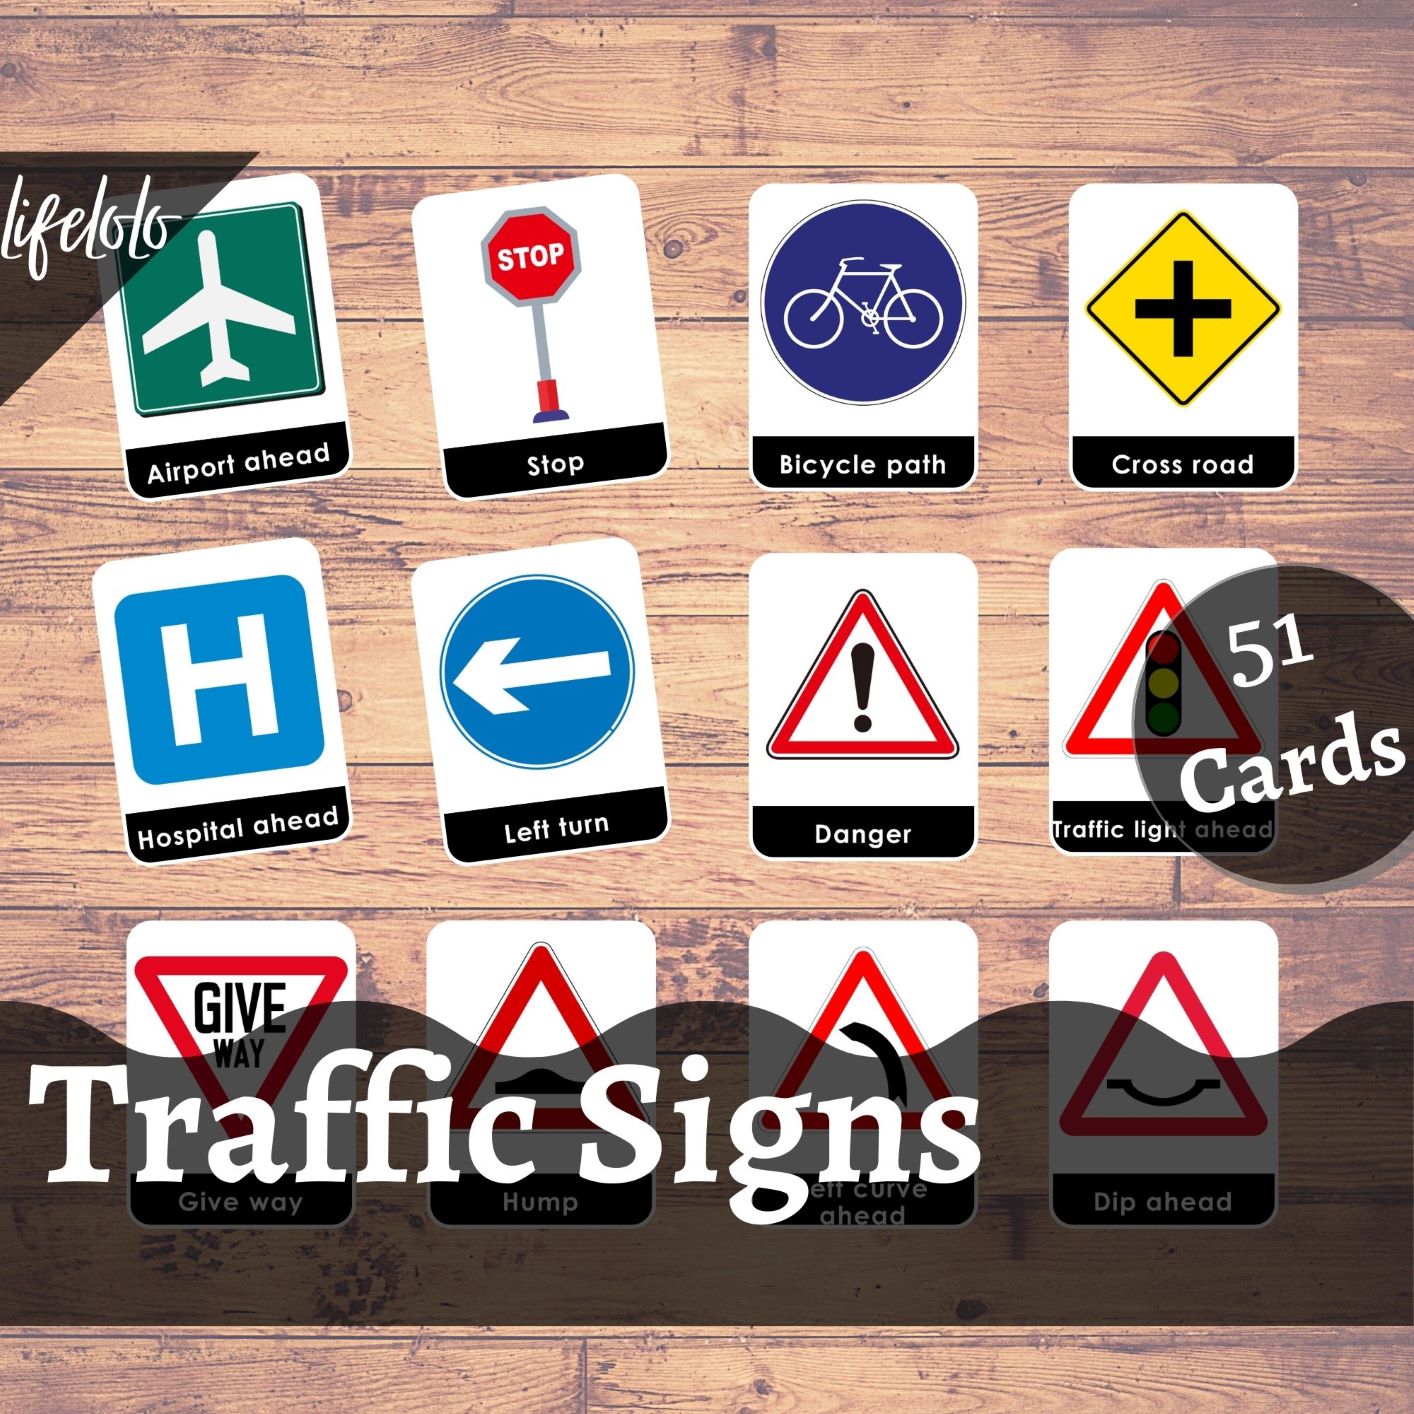 traffic-signs-51-flash-cards-street-signs-road-signs-montessori